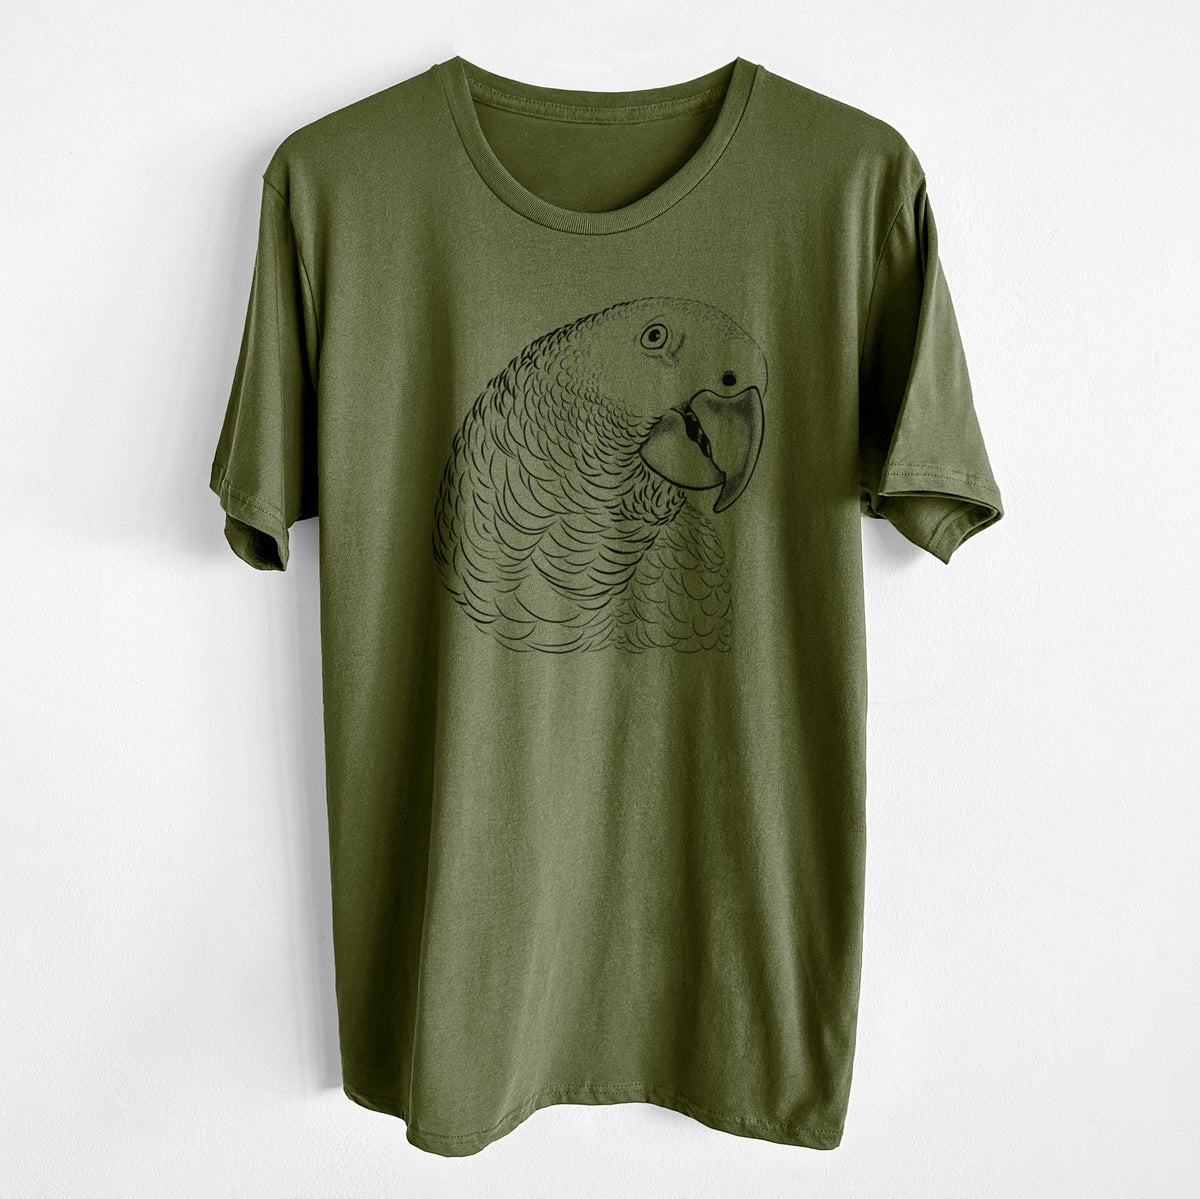 African Grey Parrot - Unisex Crewneck - Made in USA - 100% Organic Cotton